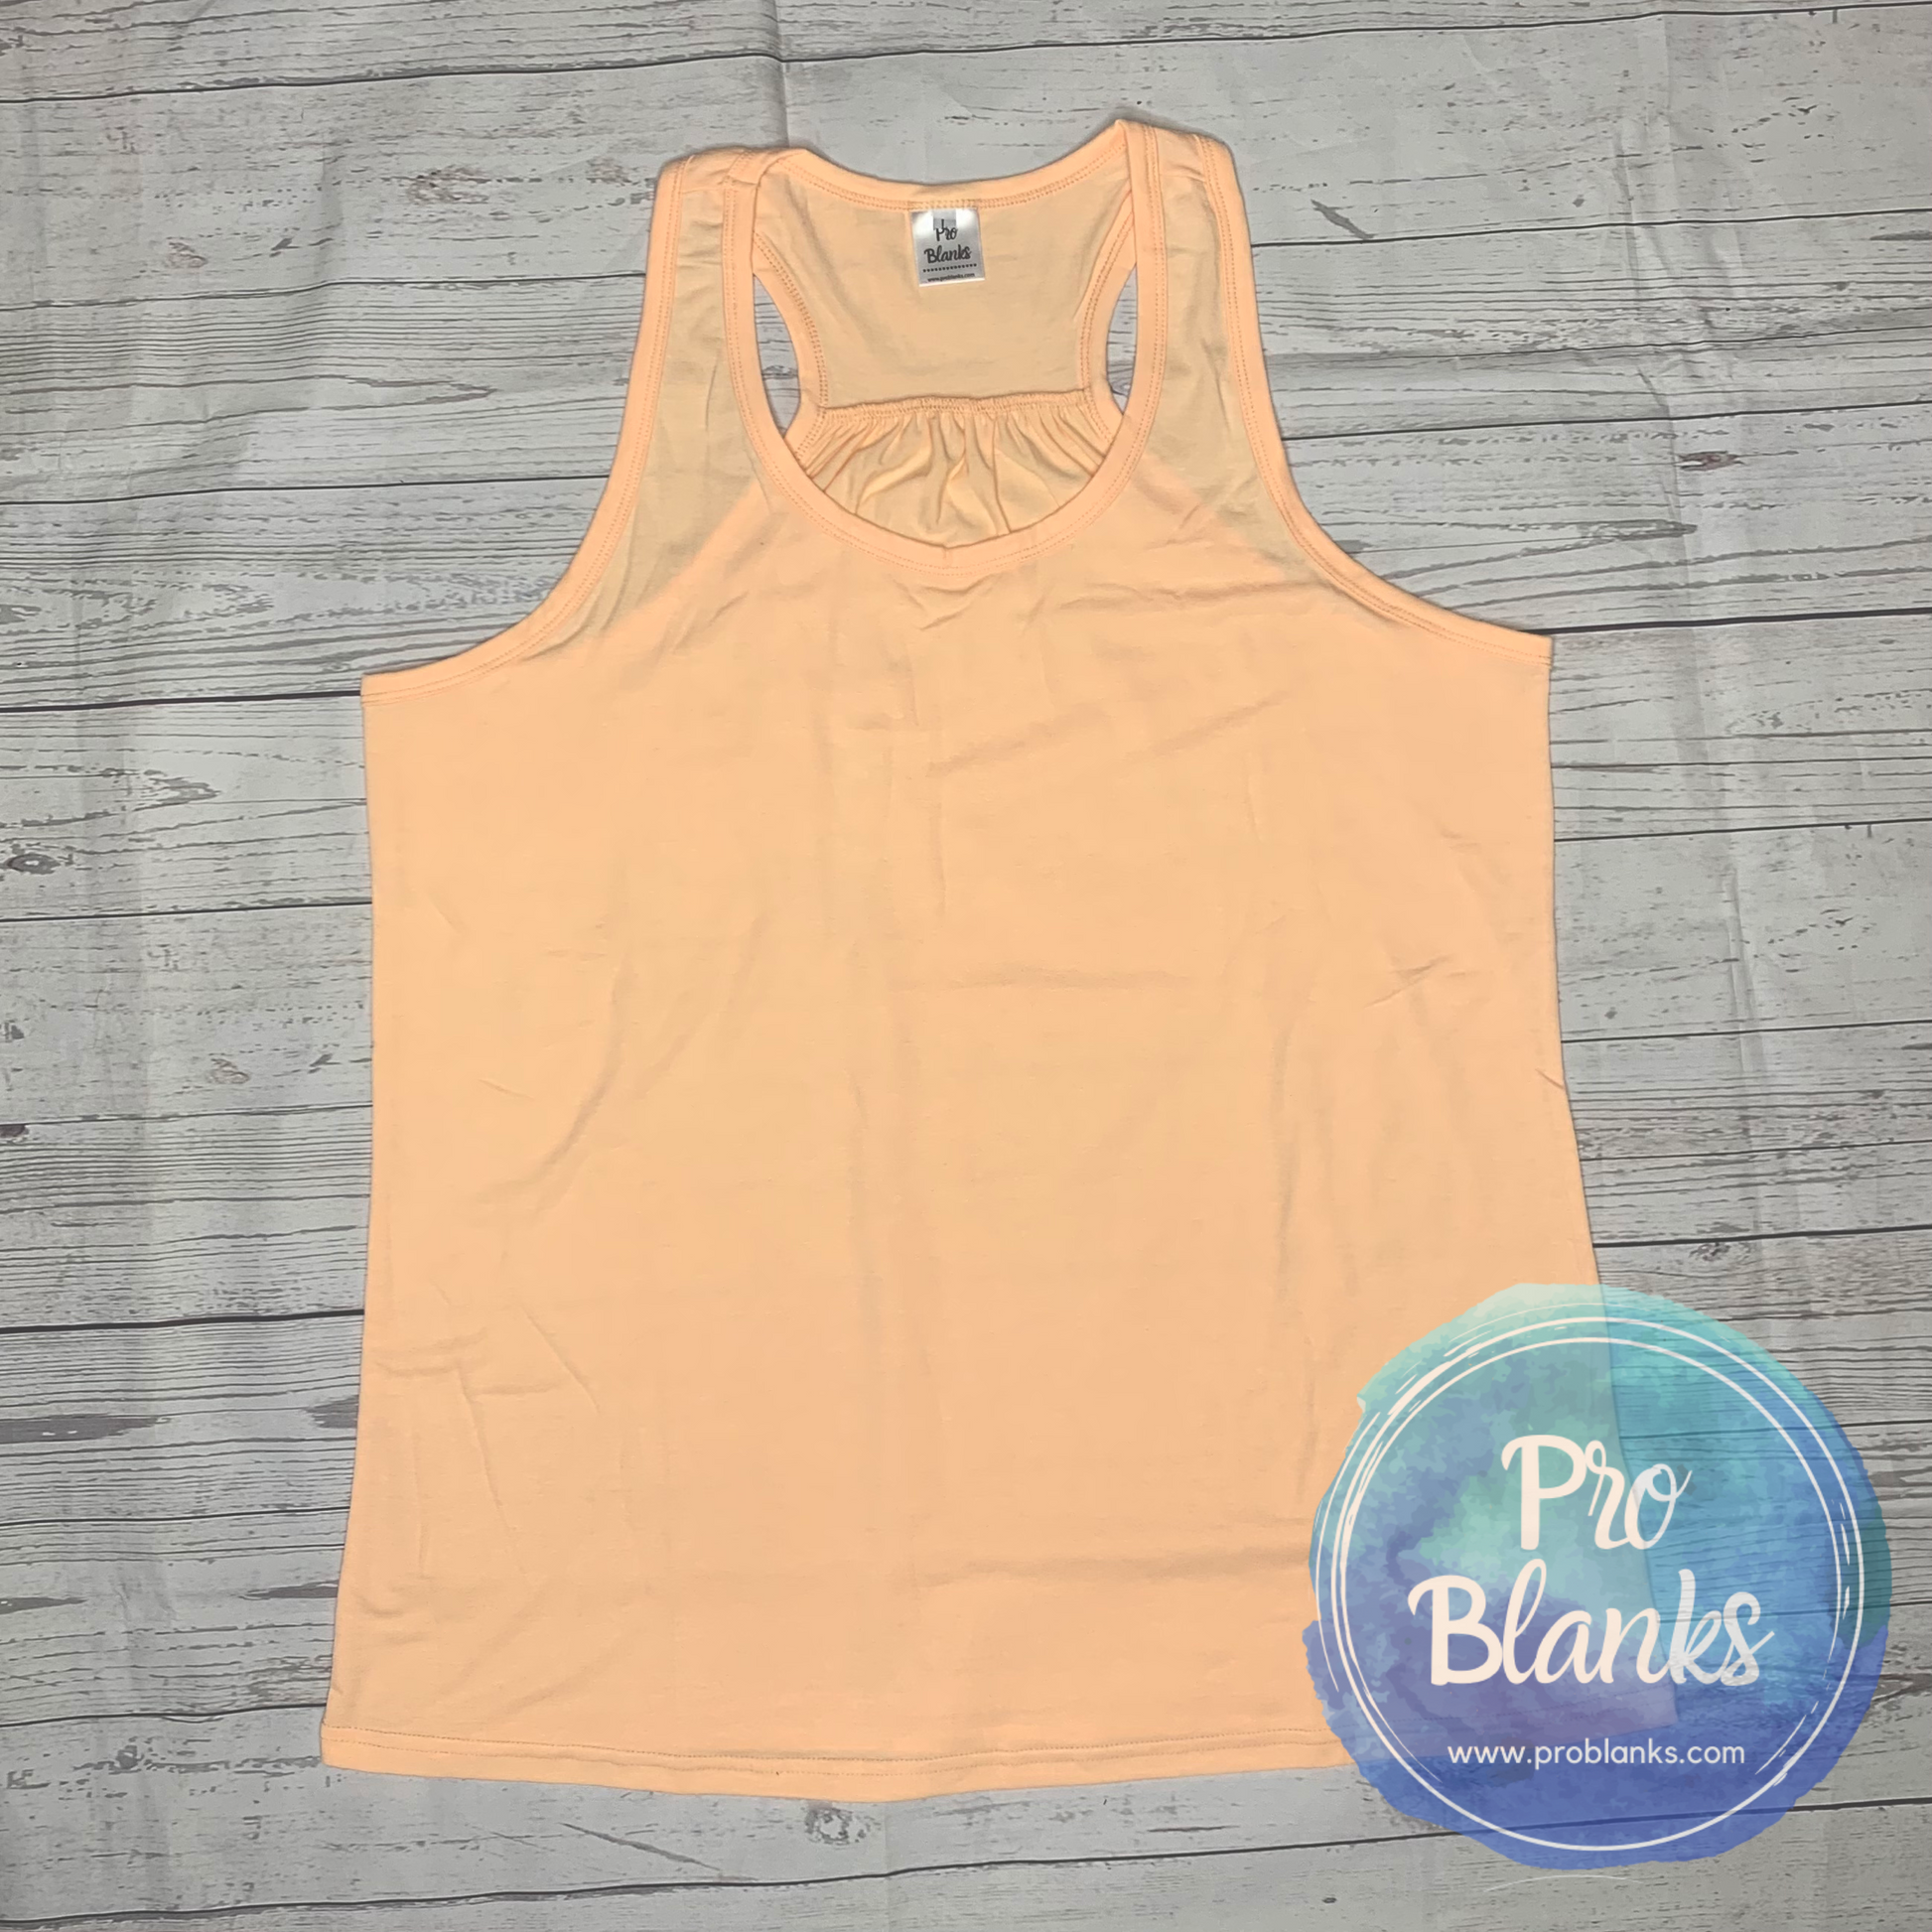 RTS- ADULT TANK TOP - 100% Polyester with Soft Cotton Feel - Pro Blanks